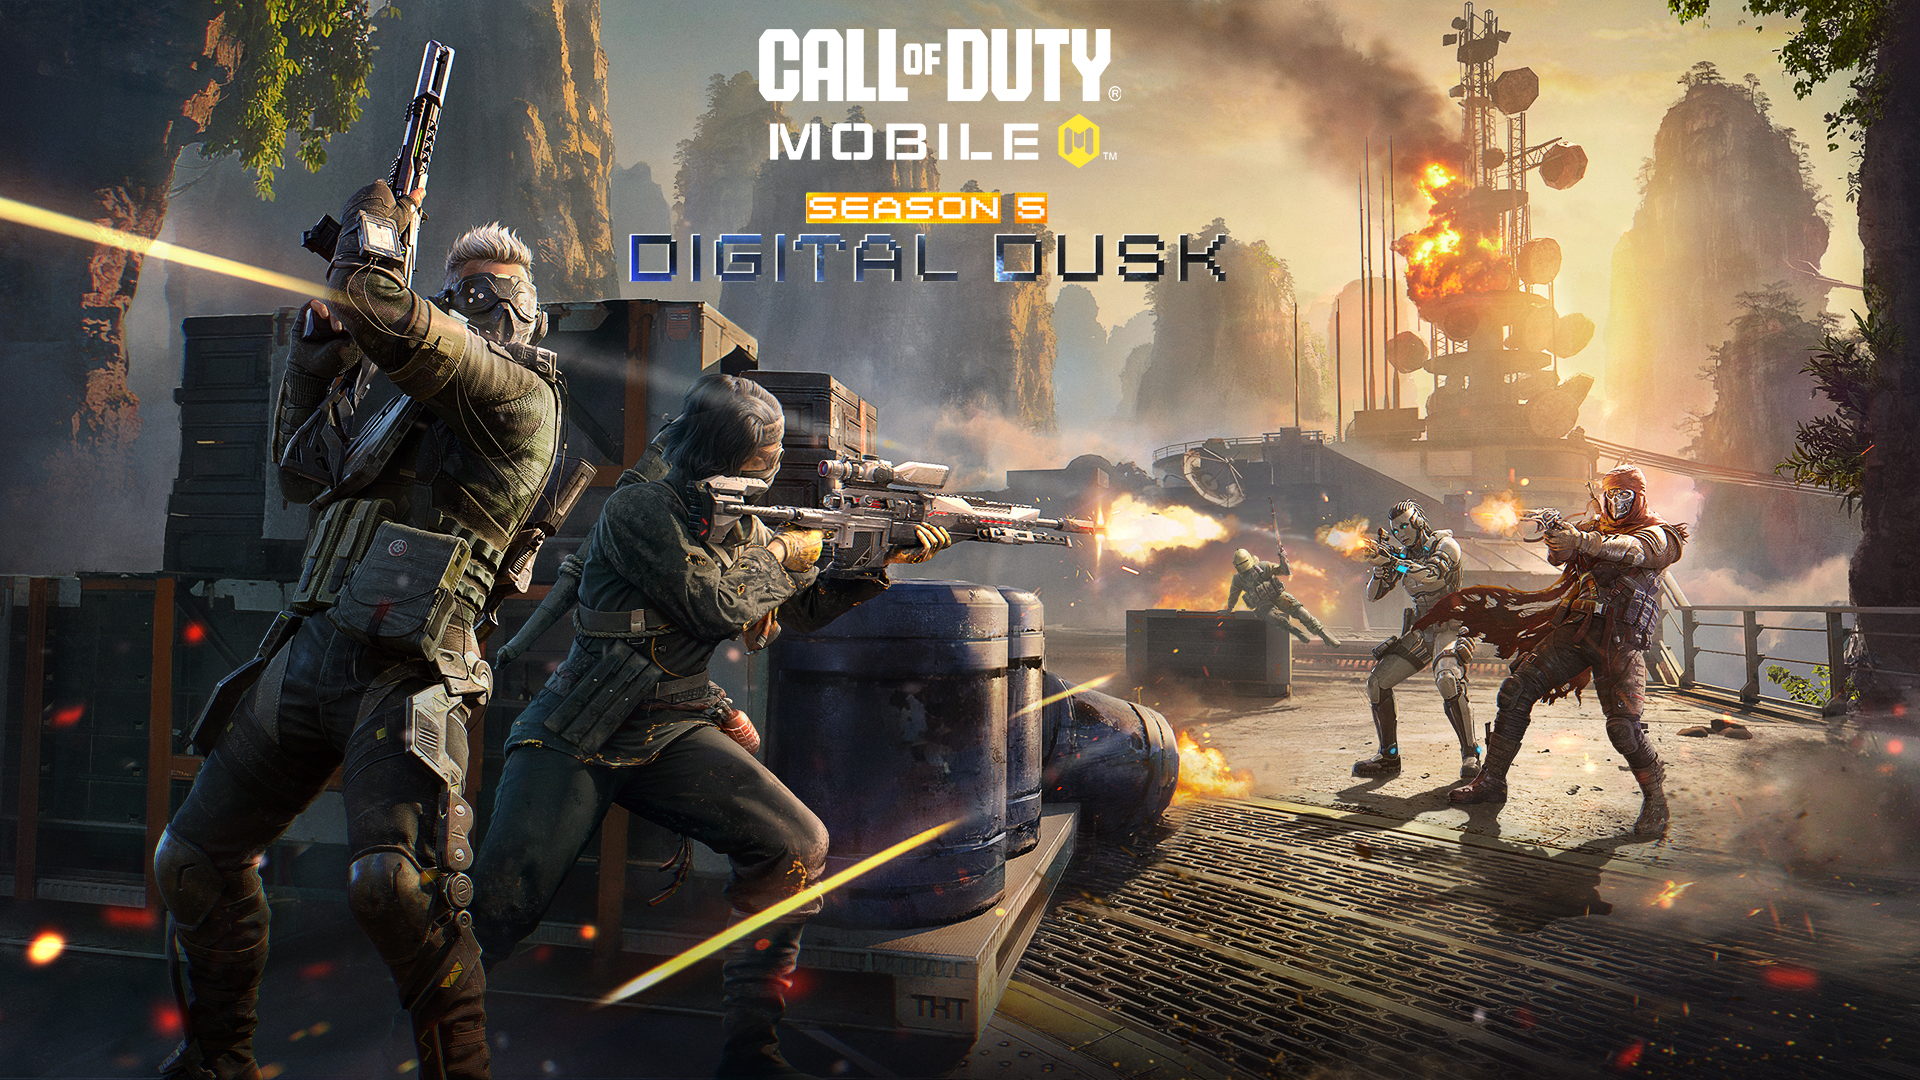 New weapon Machine Pistol! CALL OF DUTY: MOBILE SEASON 5 — DIGITAL DUSK launches on May 22 at 5PM PT